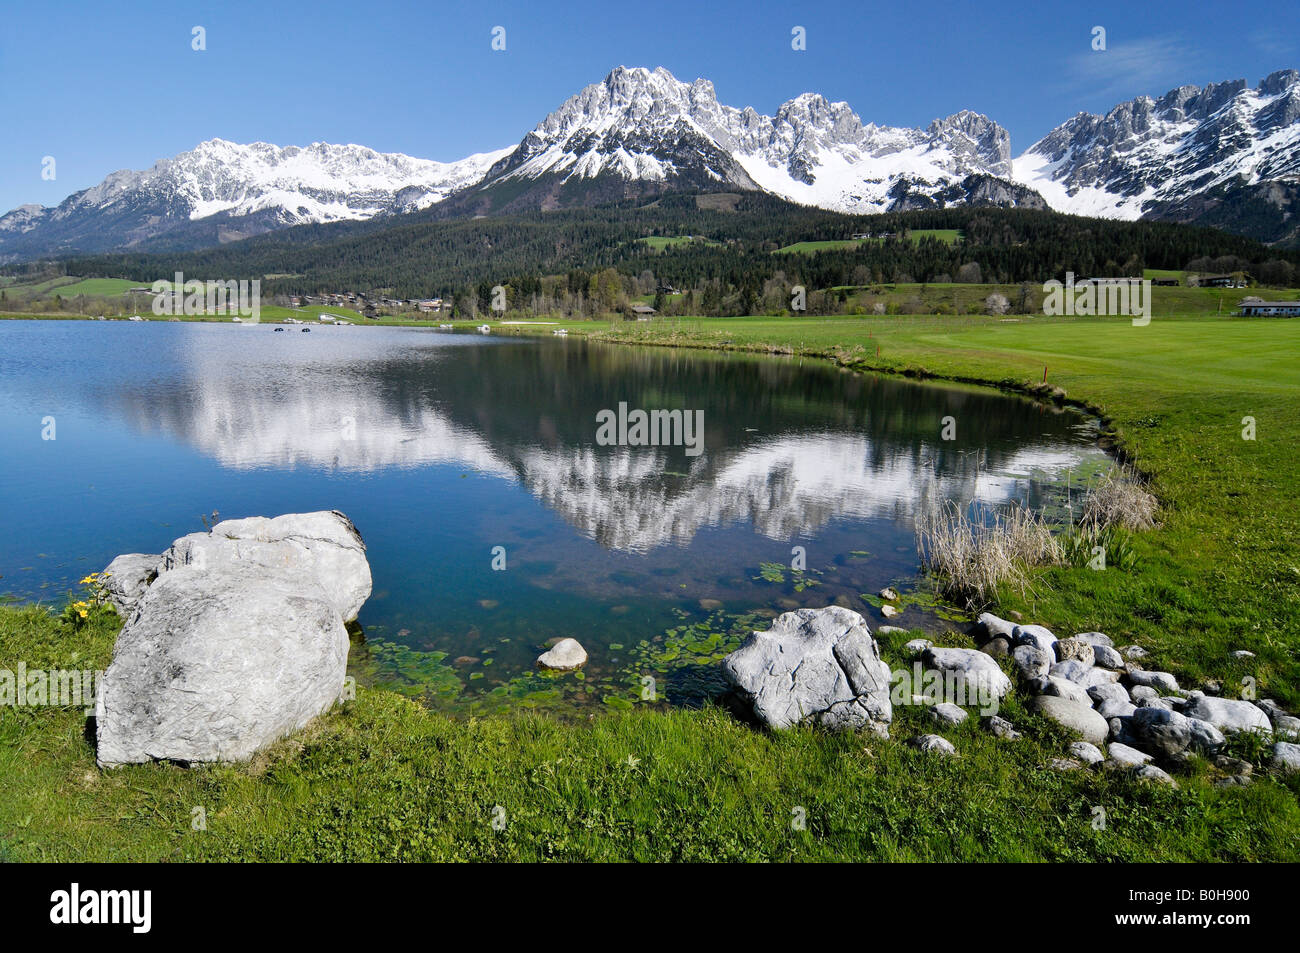 Artificial lake beside a golf course in front of the Kaisergebirge Mountains, Leukental Valley, Tyrol, Austria, Europe Stock Photo